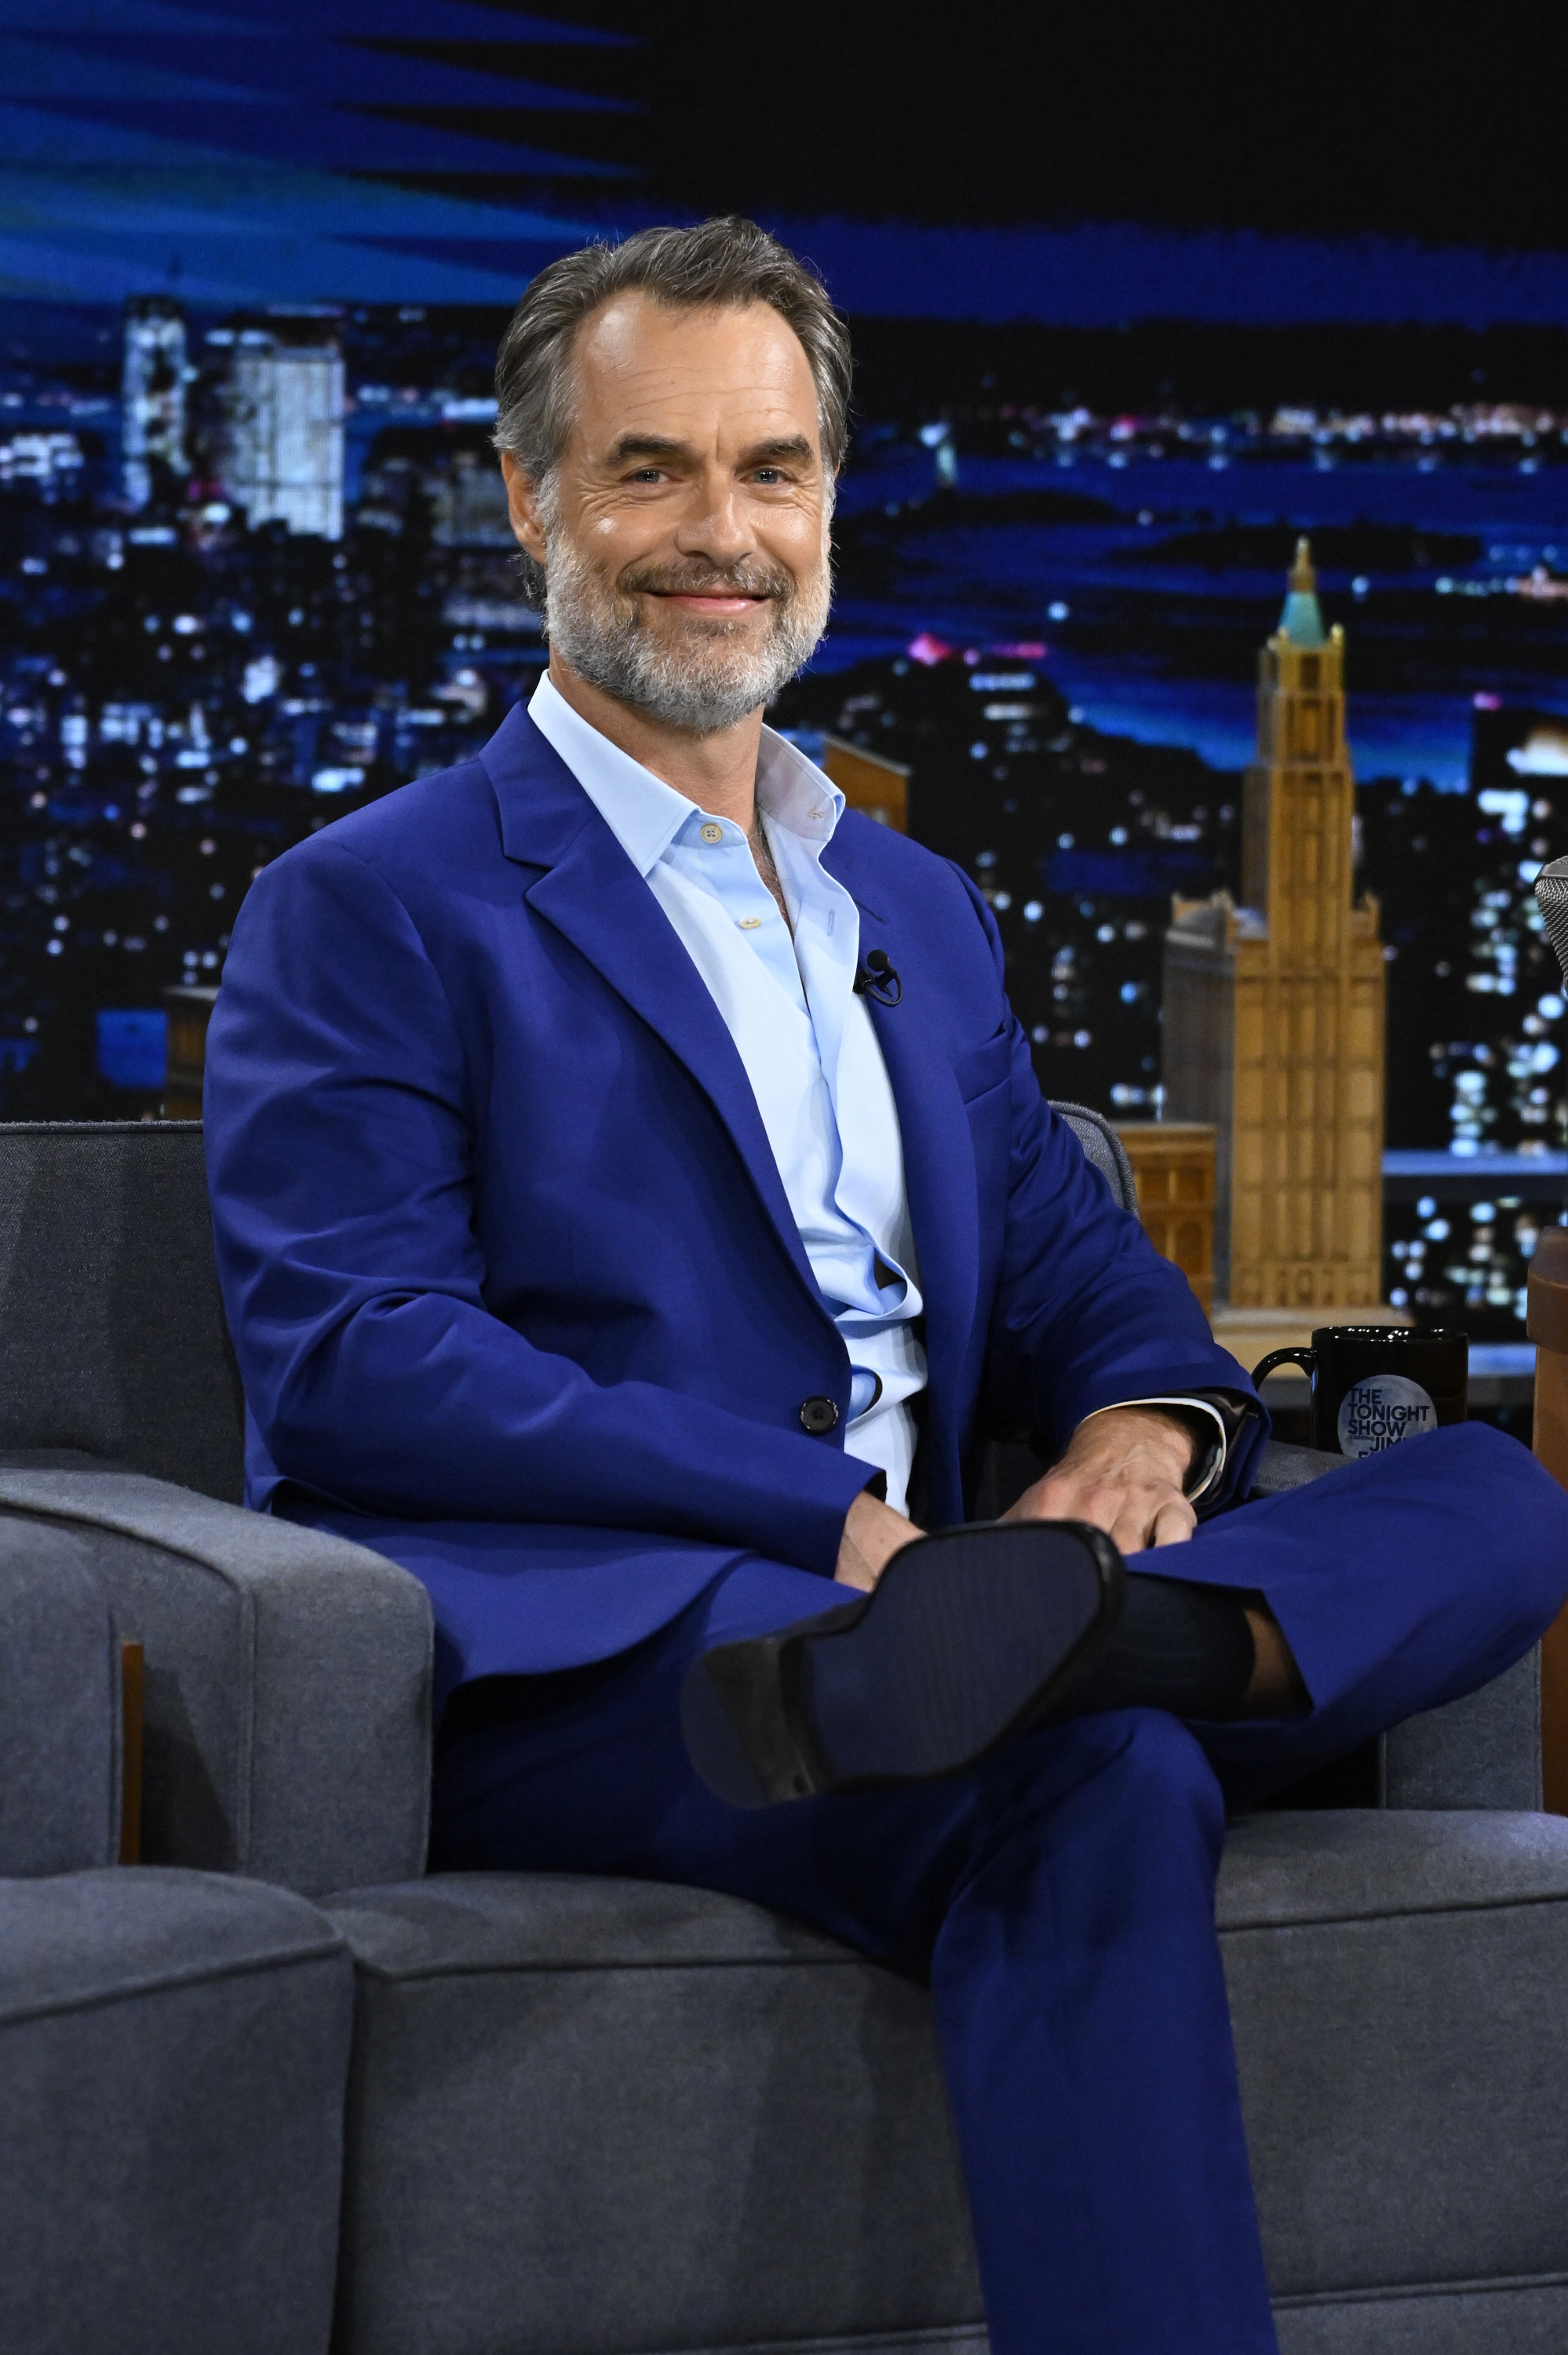 Murray Bartlett smiles as he sits onstage during a late-night TV show interview